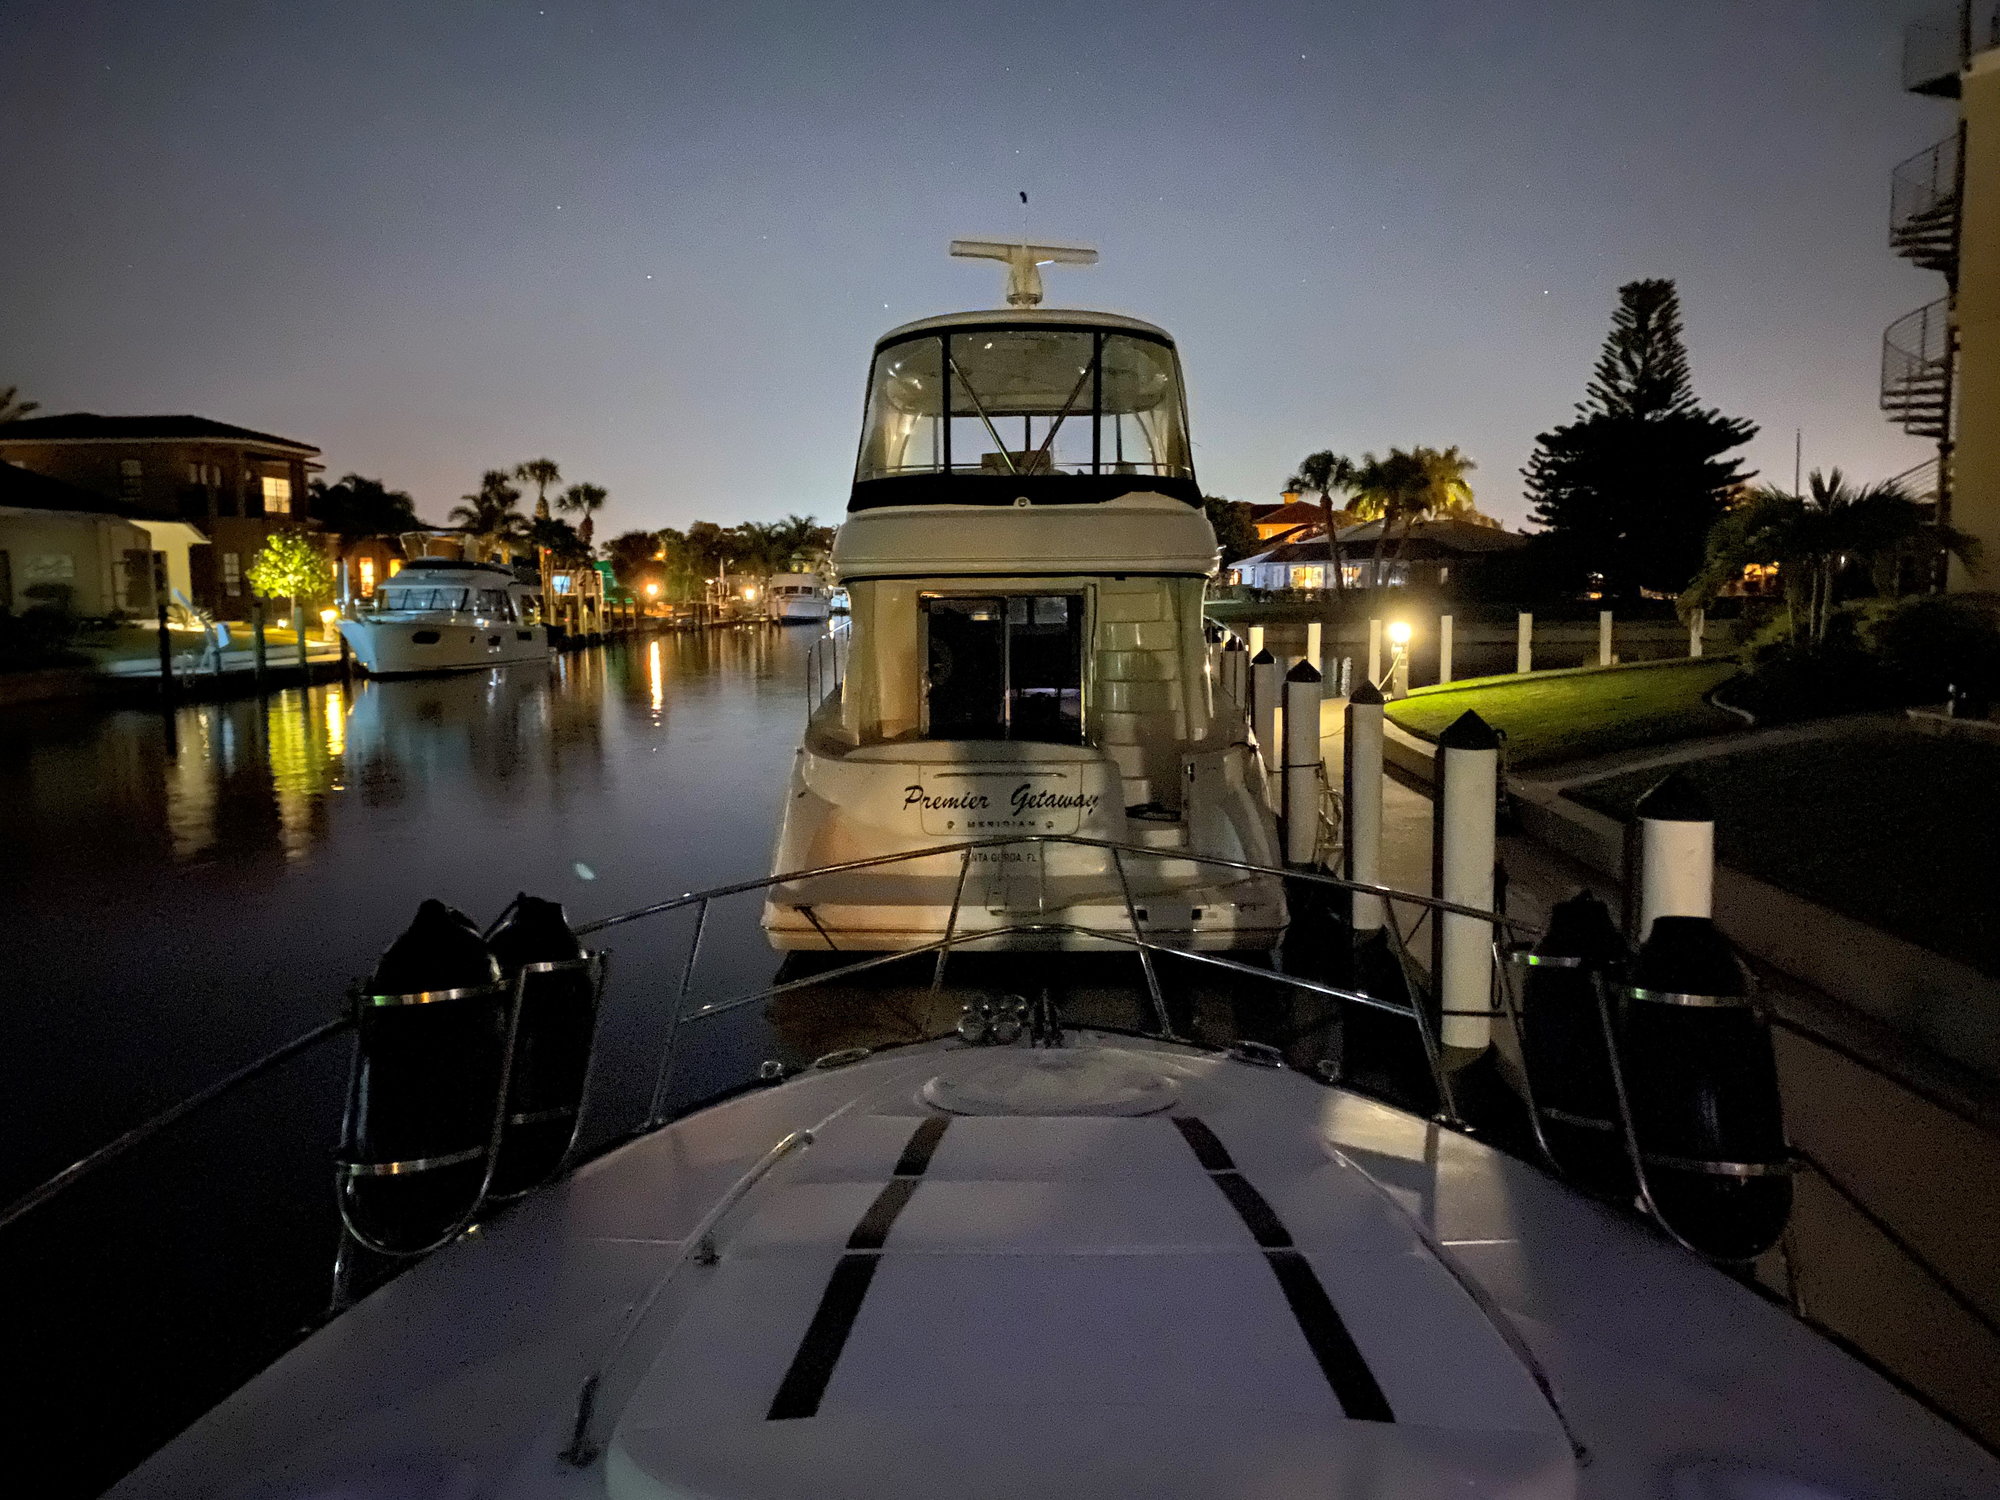 Flir md-625 lens damage? - The Hull Truth - Boating and Fishing Forum